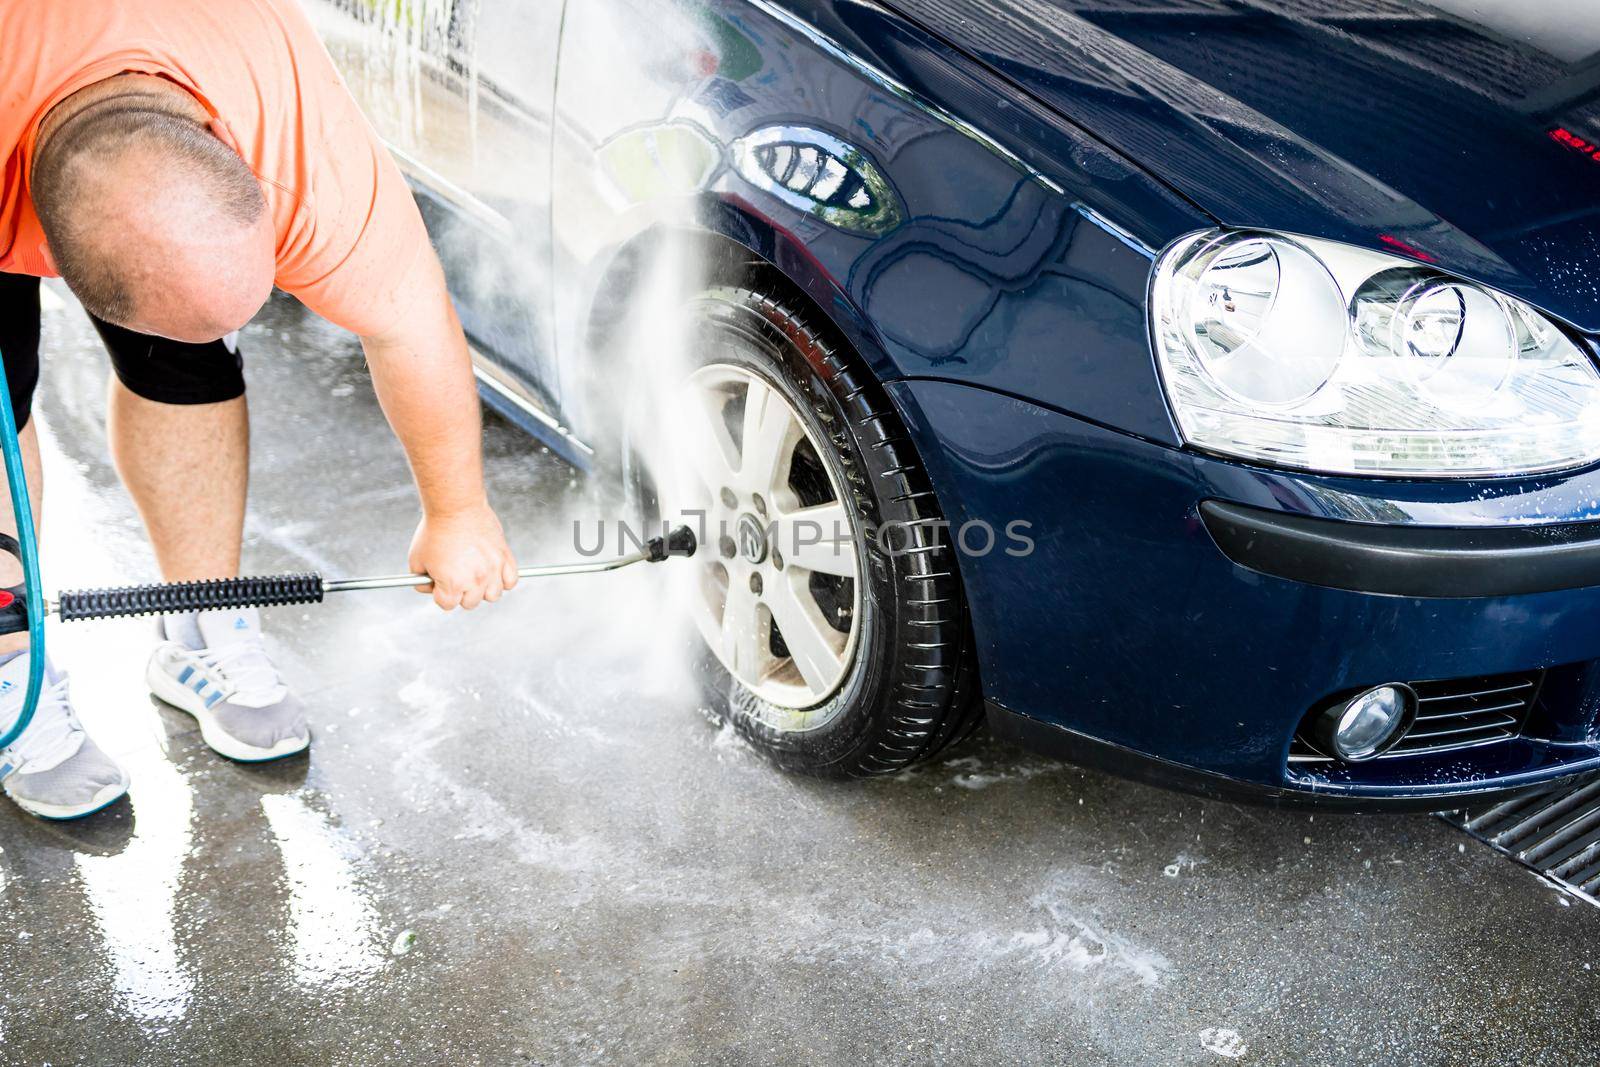 Washing and cleaning car in self service car wash station. Car washing using high pressure water in Bucharest, Romania, 2021